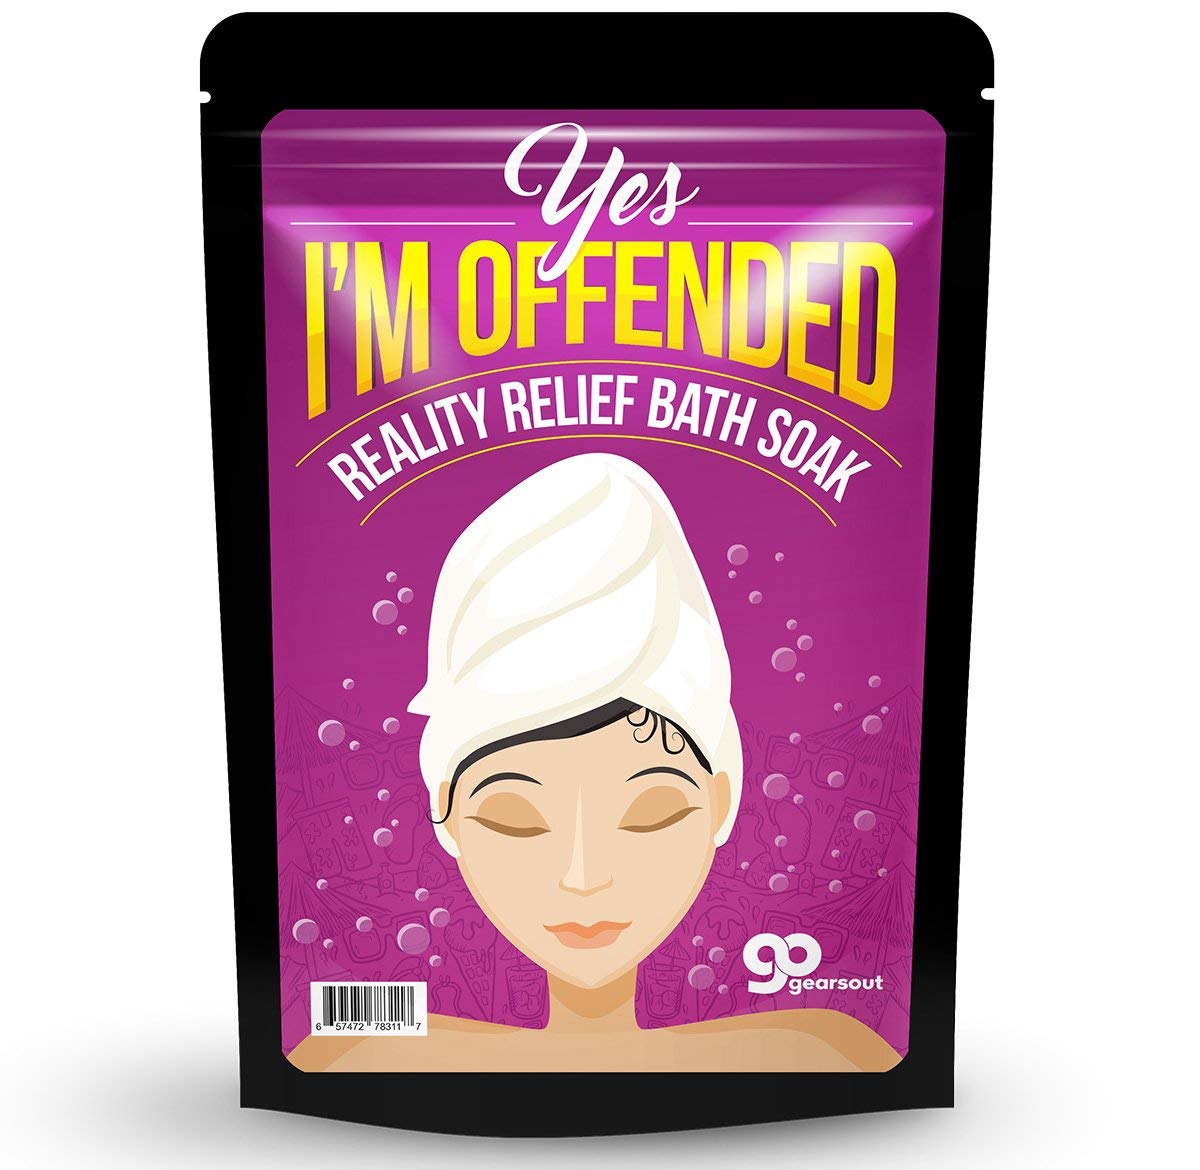 Yes, I'm Offended Bath Soak - Purple Bath Salts Luxury Bath Girlfriend Gifts for Best Friends Bath and Body Gifts for Women Mediterranean Sea Salts Sarcastic Gifts Funny Novelty Bath Spa Gifts